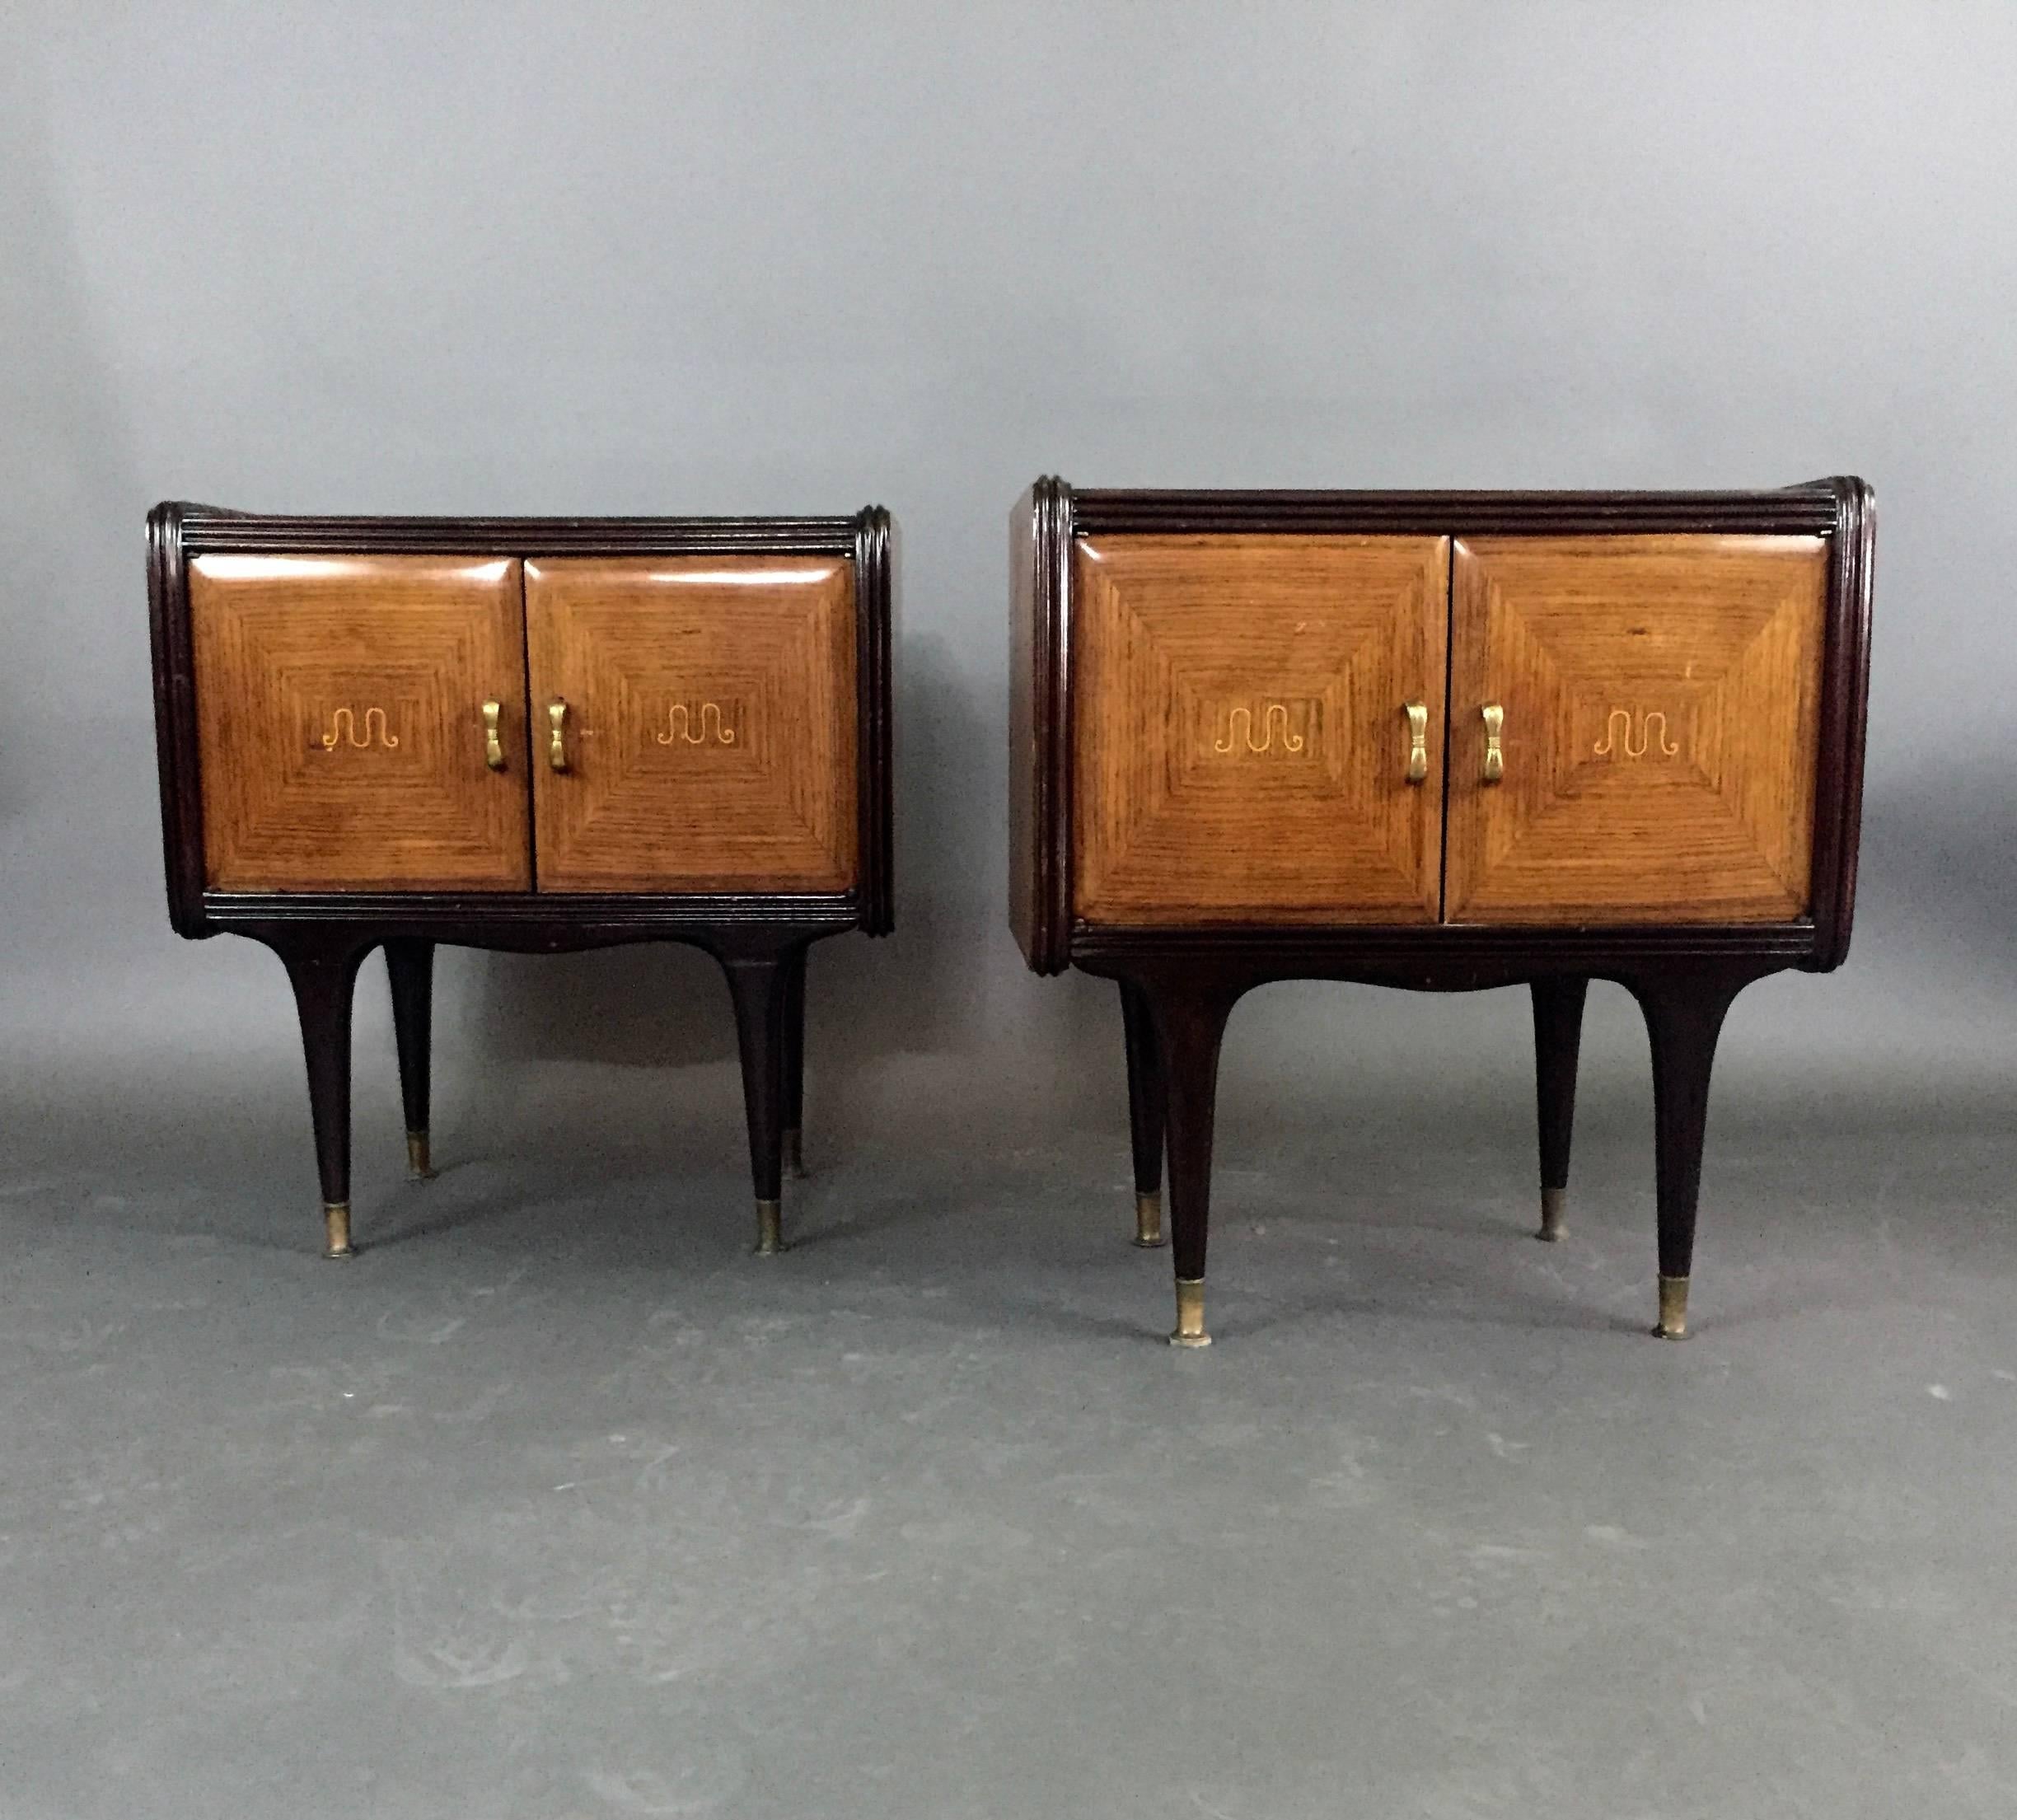 A gorgeous pair of nightstands designed with a rosewood veneer case surrounded with dark stained channelled framing. Each door panel is quartered, curved at the edges and is centred with light-stained intarsia. Four black lacquered legs are finished